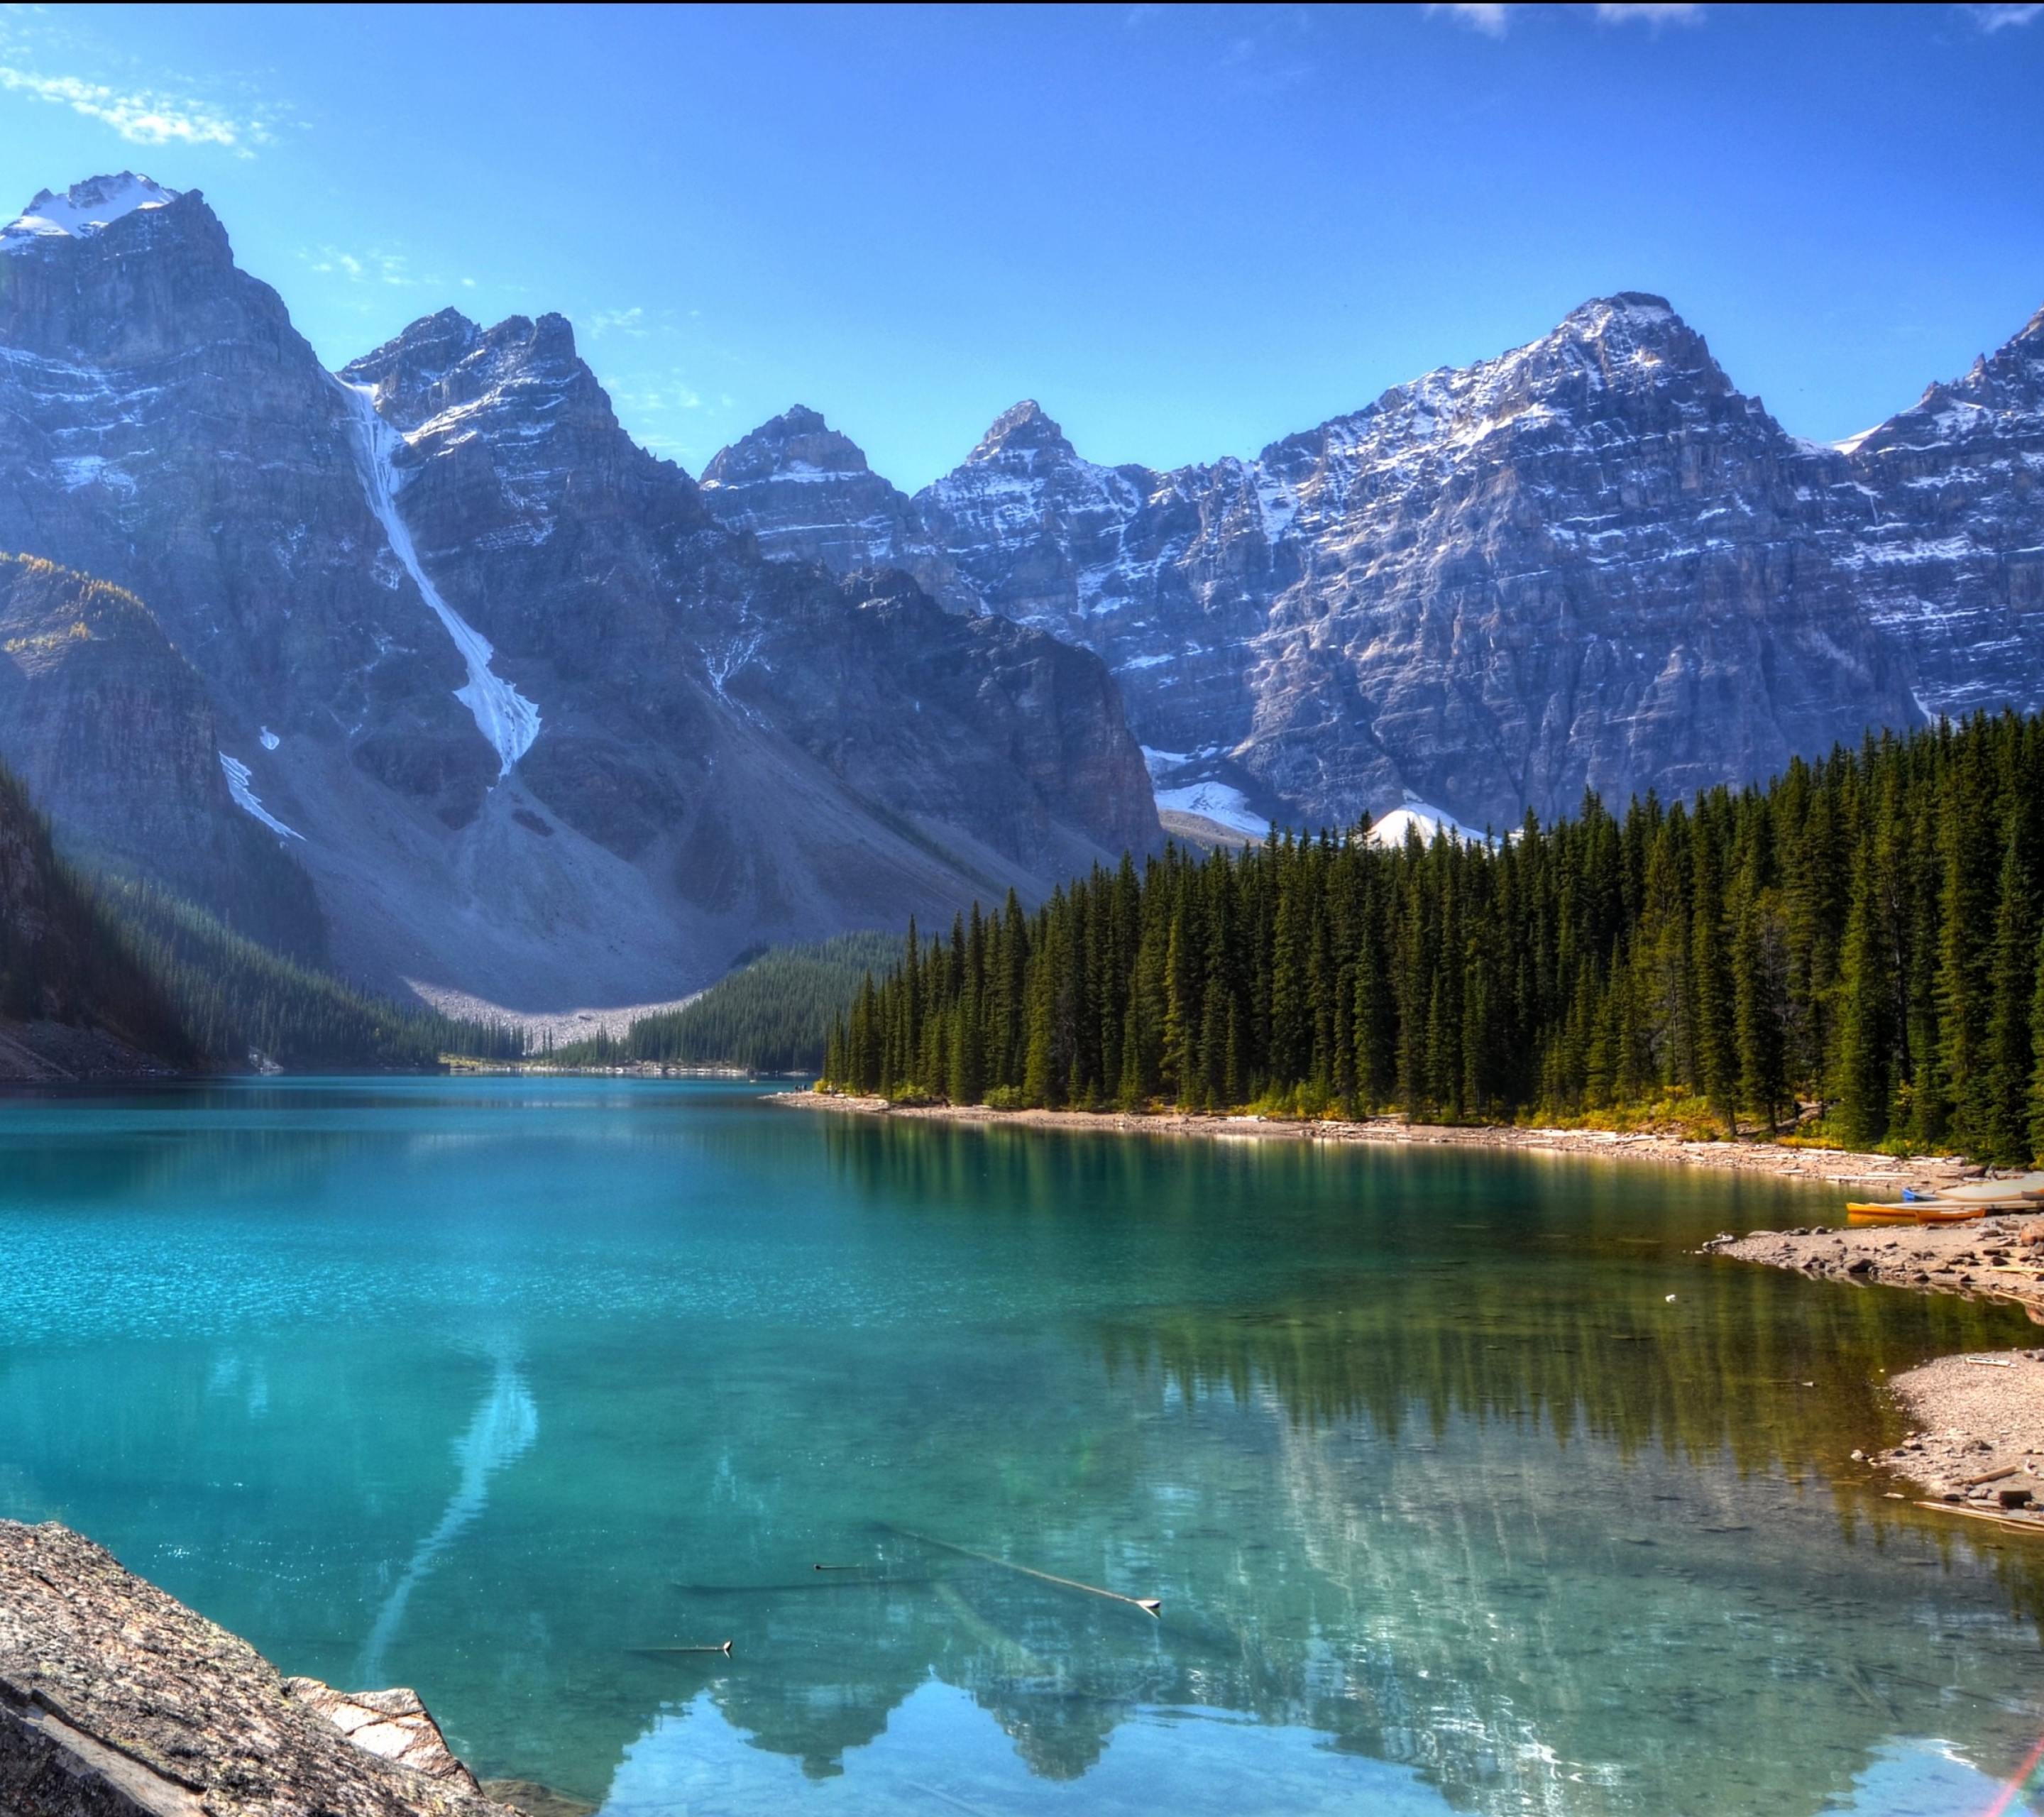 Download mobile wallpaper Lakes, Mountain, Lake, Reflection, Canada, Earth, Cliff, Alberta, Moraine Lake, Banff National Park, Canadian Rockies for free.